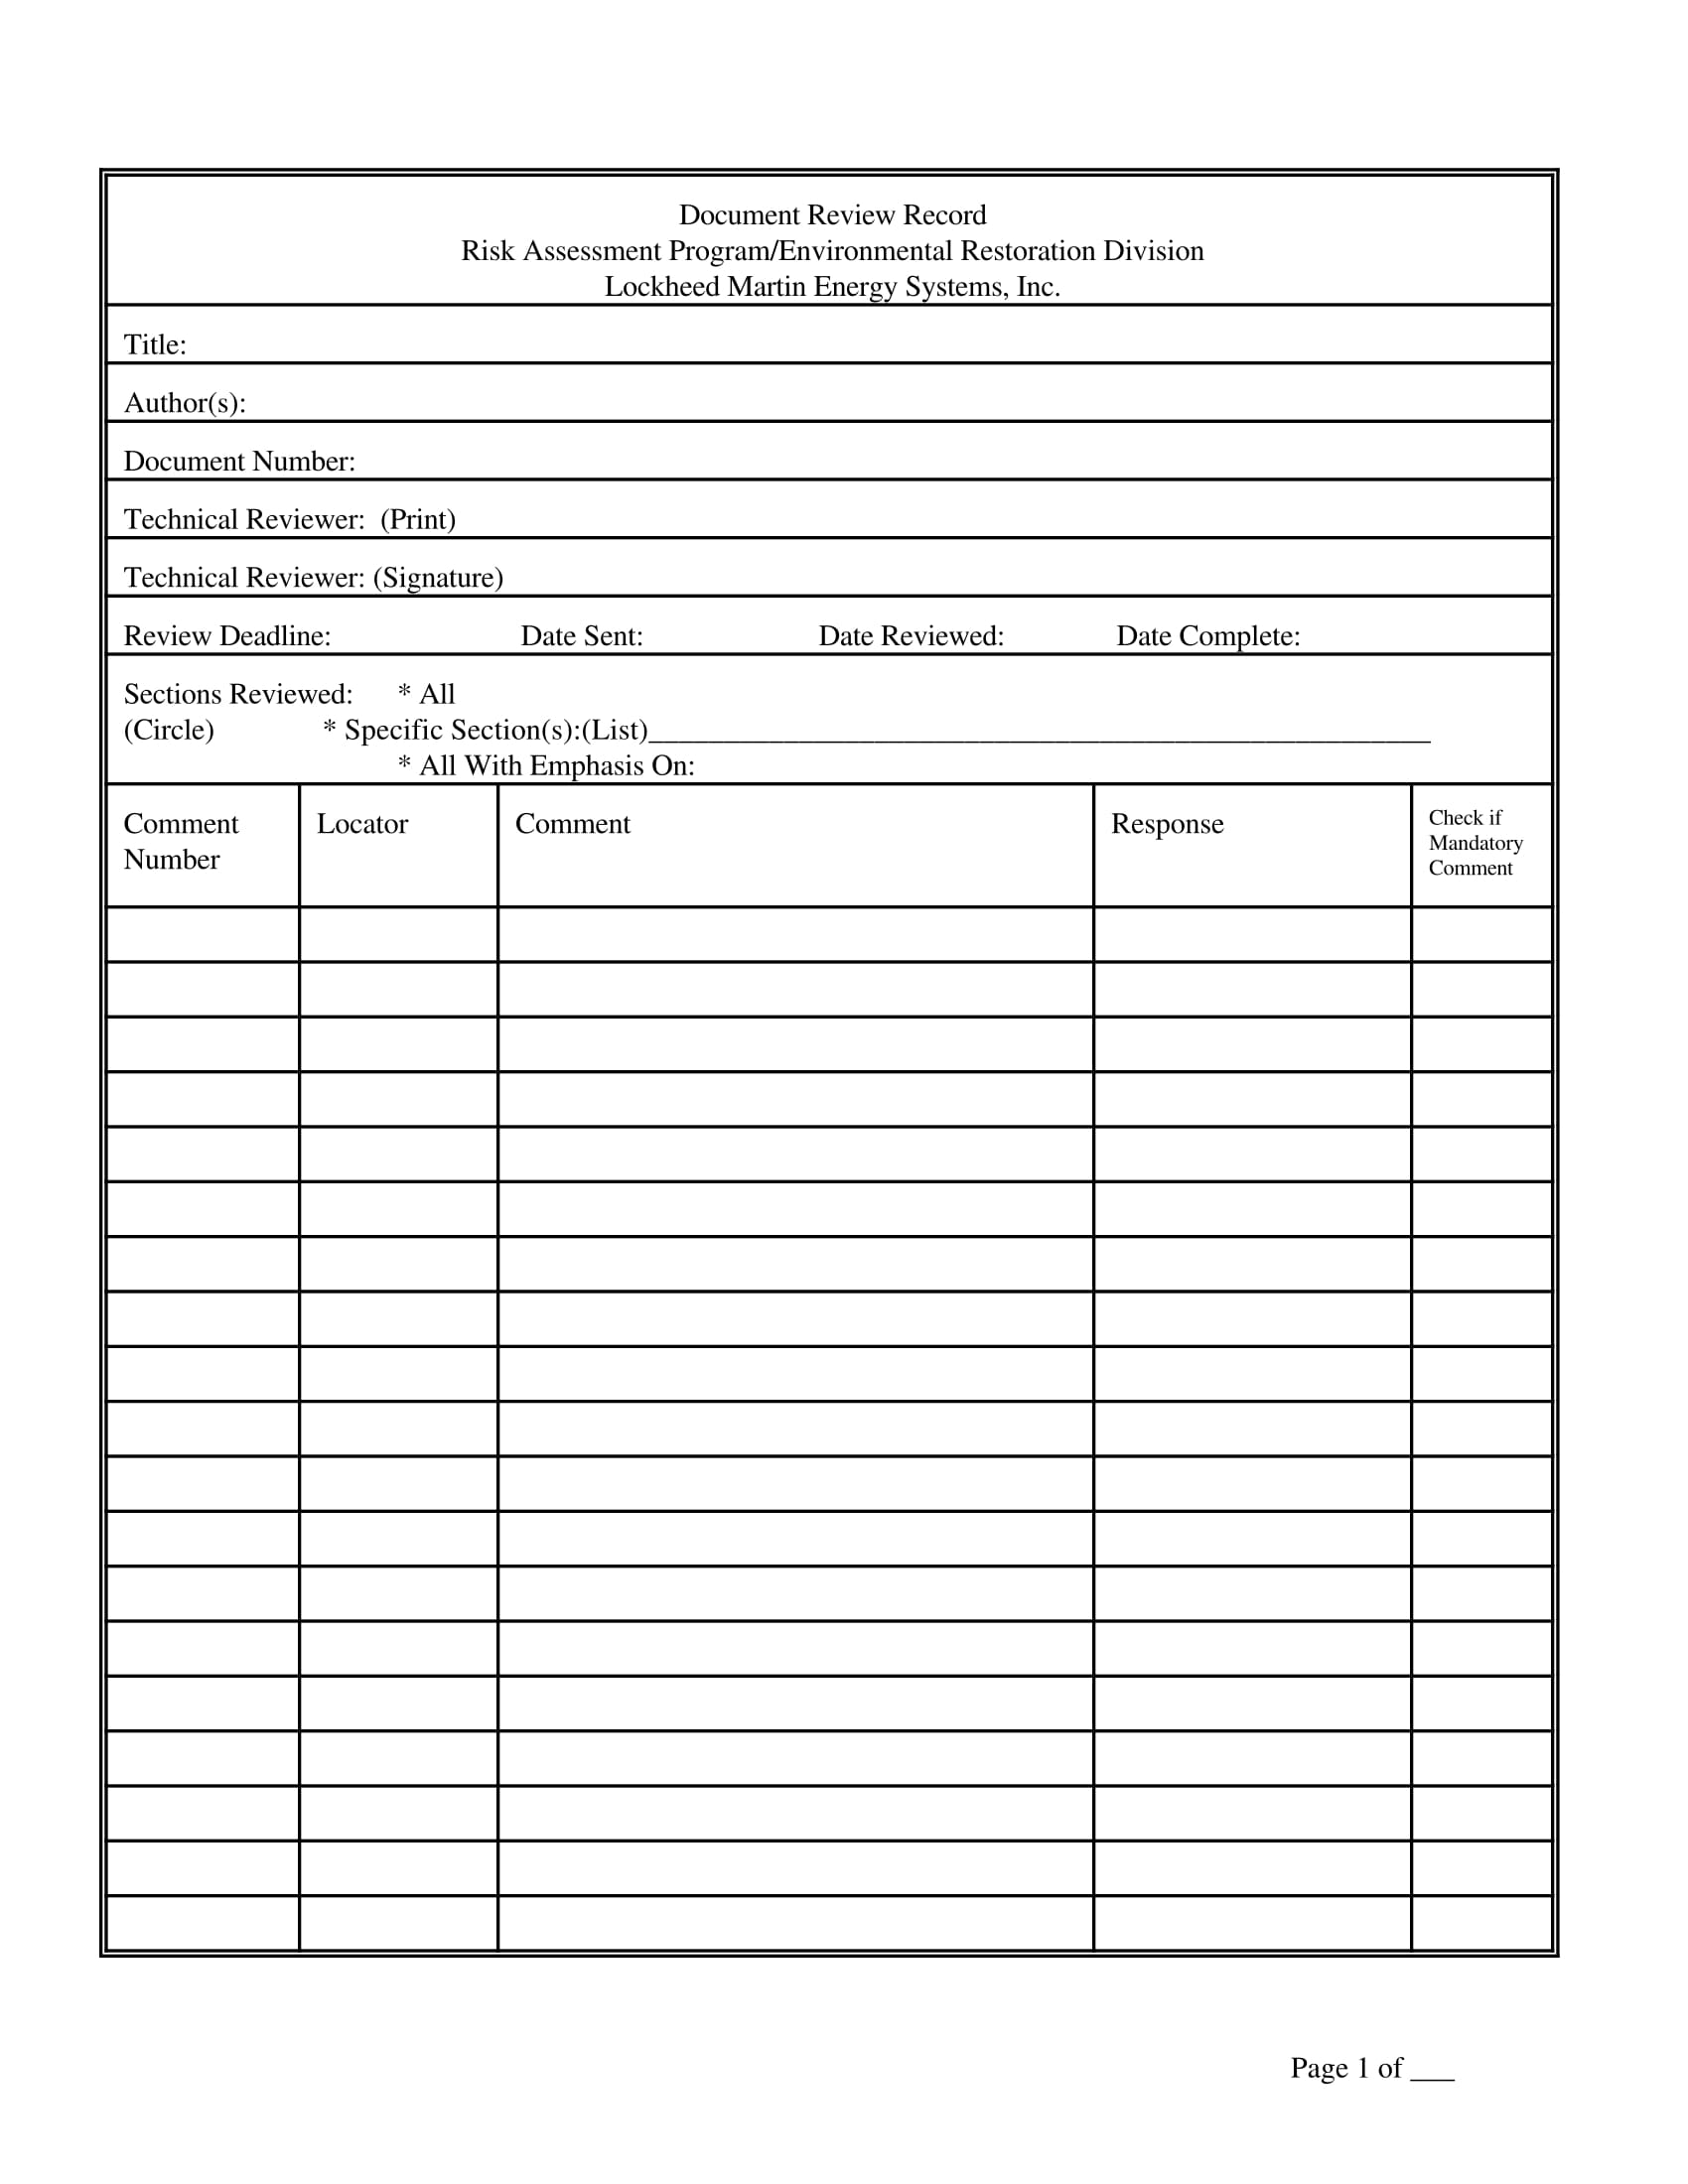 document review record form 2